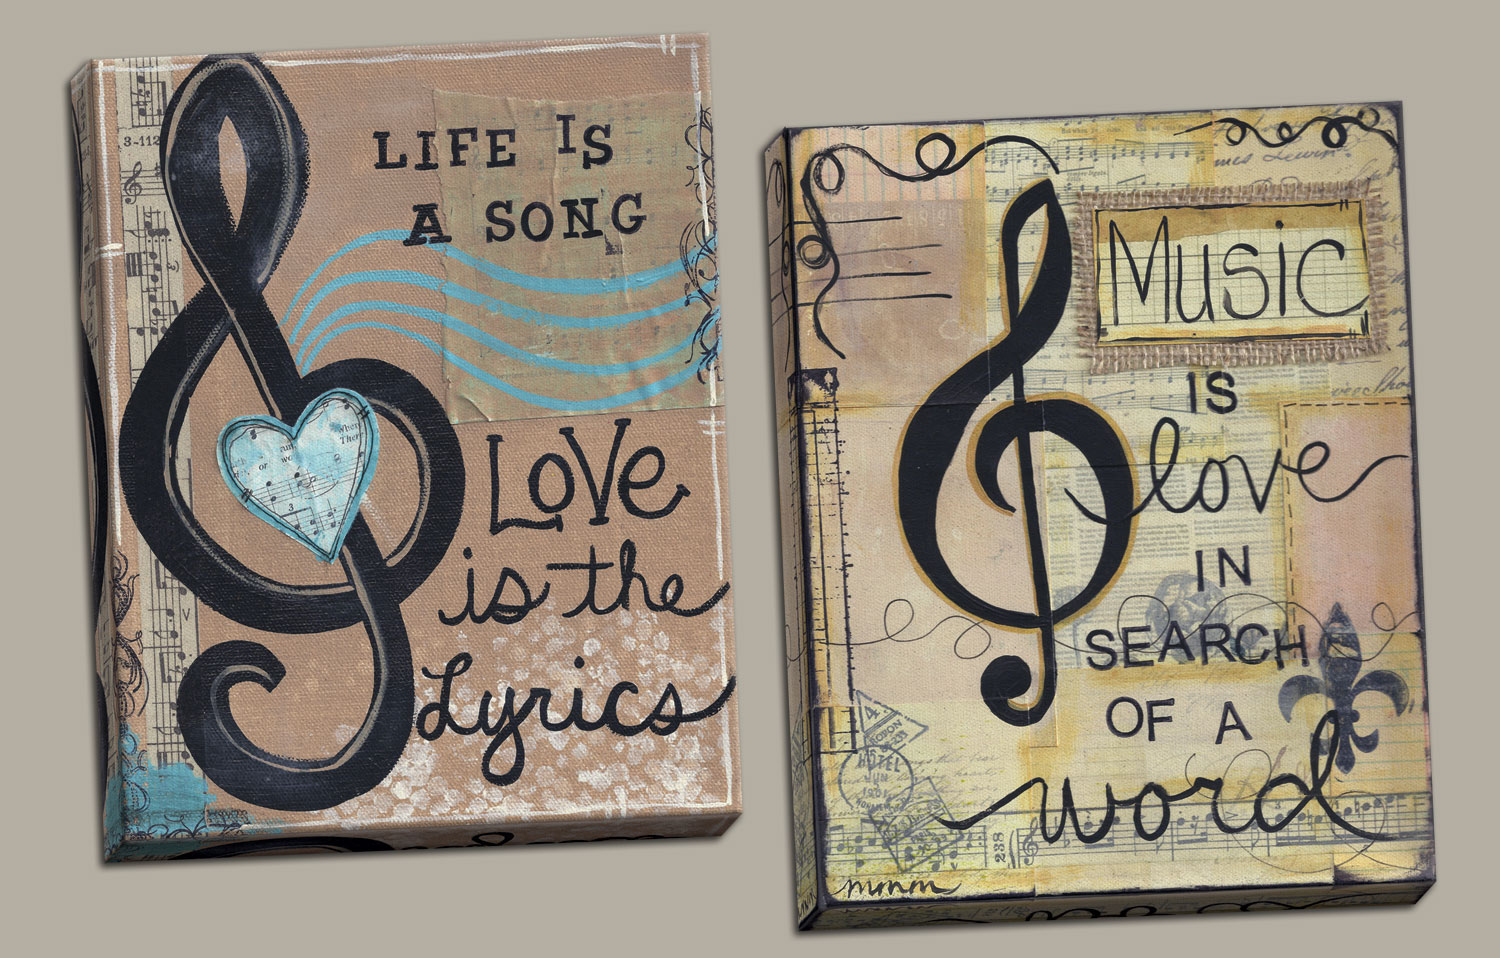 Beautiful Scrapbook-Style "Life Is A Song, Love Is The Lyrics" and "Music Is Love In Search Of A Word" Set; Two 11x14in Hand-Stretched Canvases - image 1 of 1